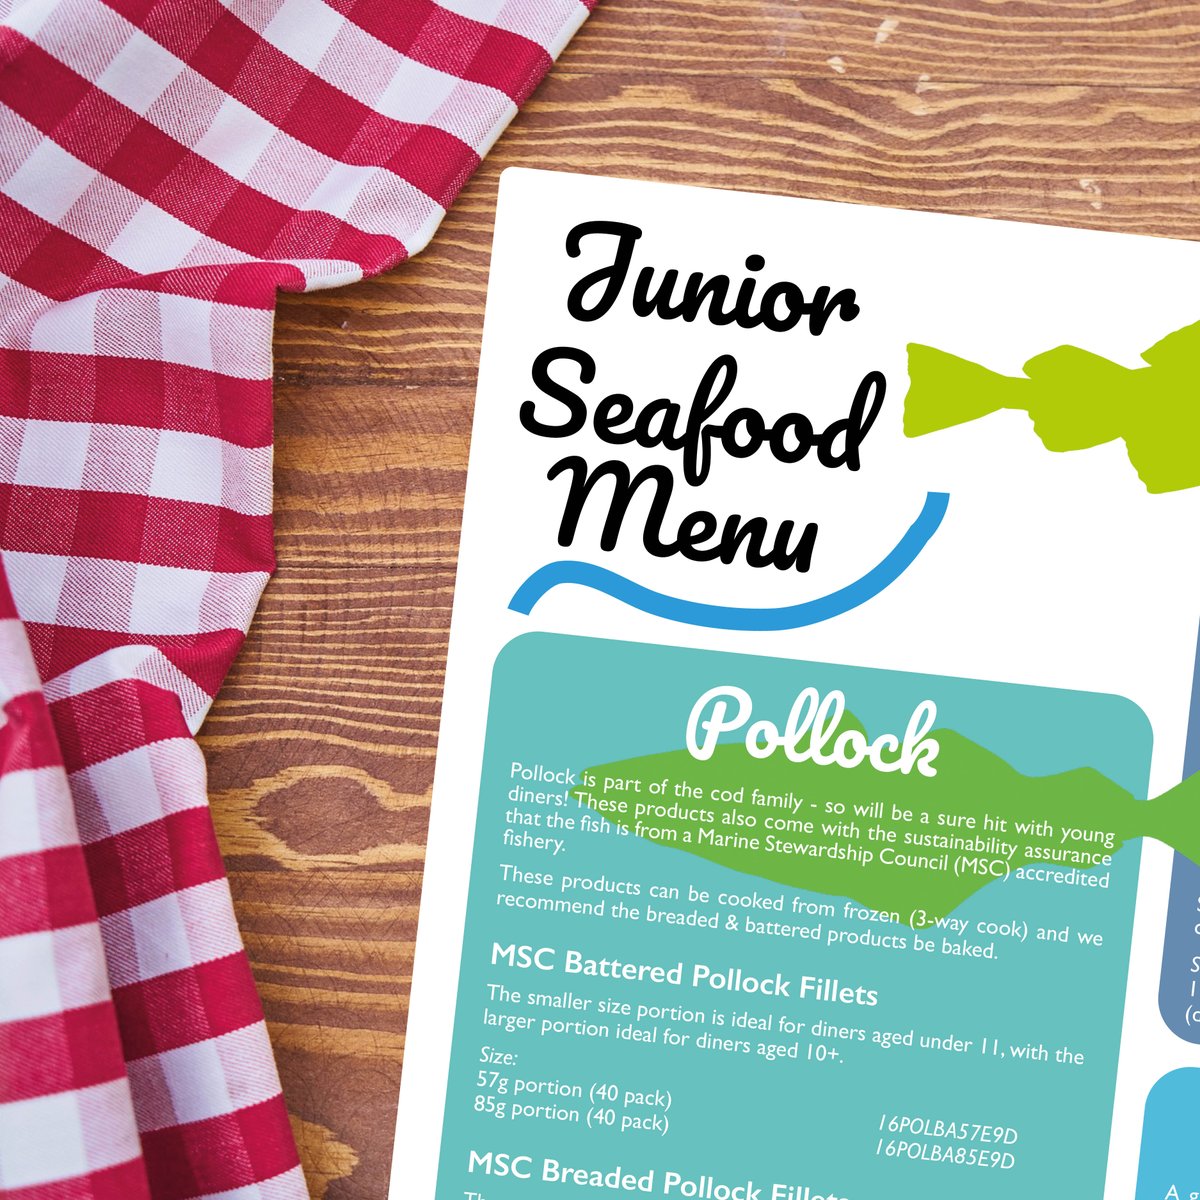 It’s #NationalSchoolMealsWeek 📚

We offer some great bite size options such as cod bites, plaice goujons and battered fillets, all perfect to introduce fish to a kid’s diet, as well as, the many health benefits that come with them such as vitamins, minerals and omega-3!

@NSMW